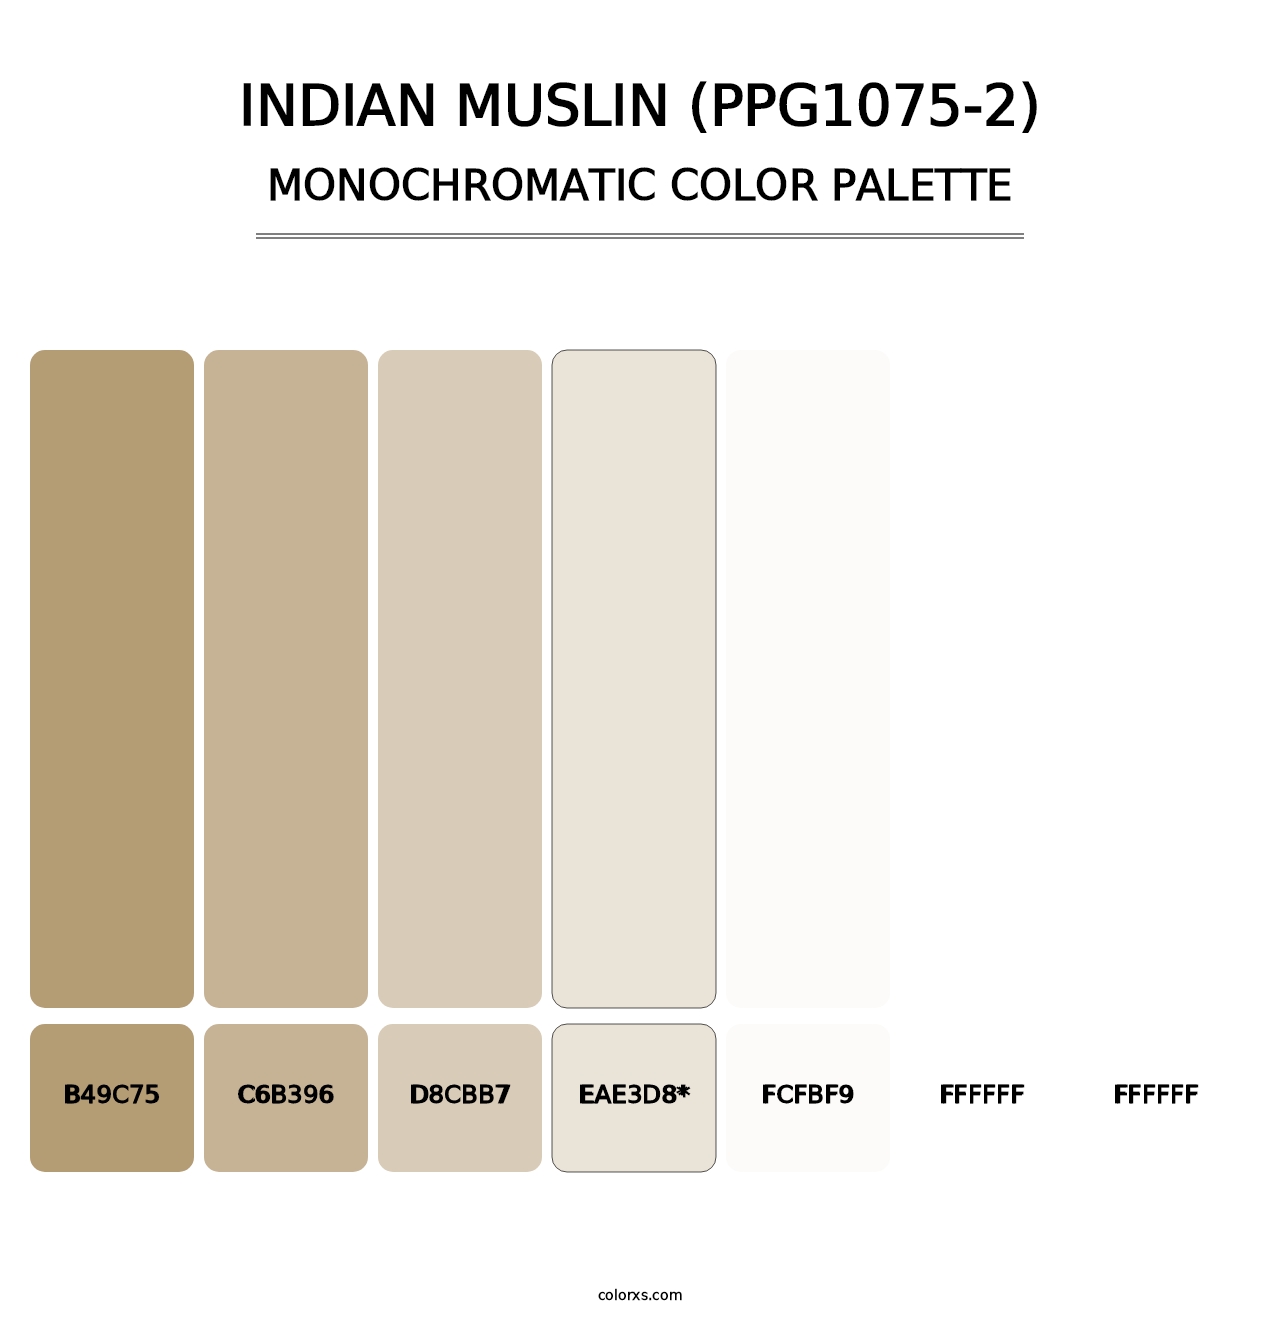 Indian Muslin (PPG1075-2) - Monochromatic Color Palette